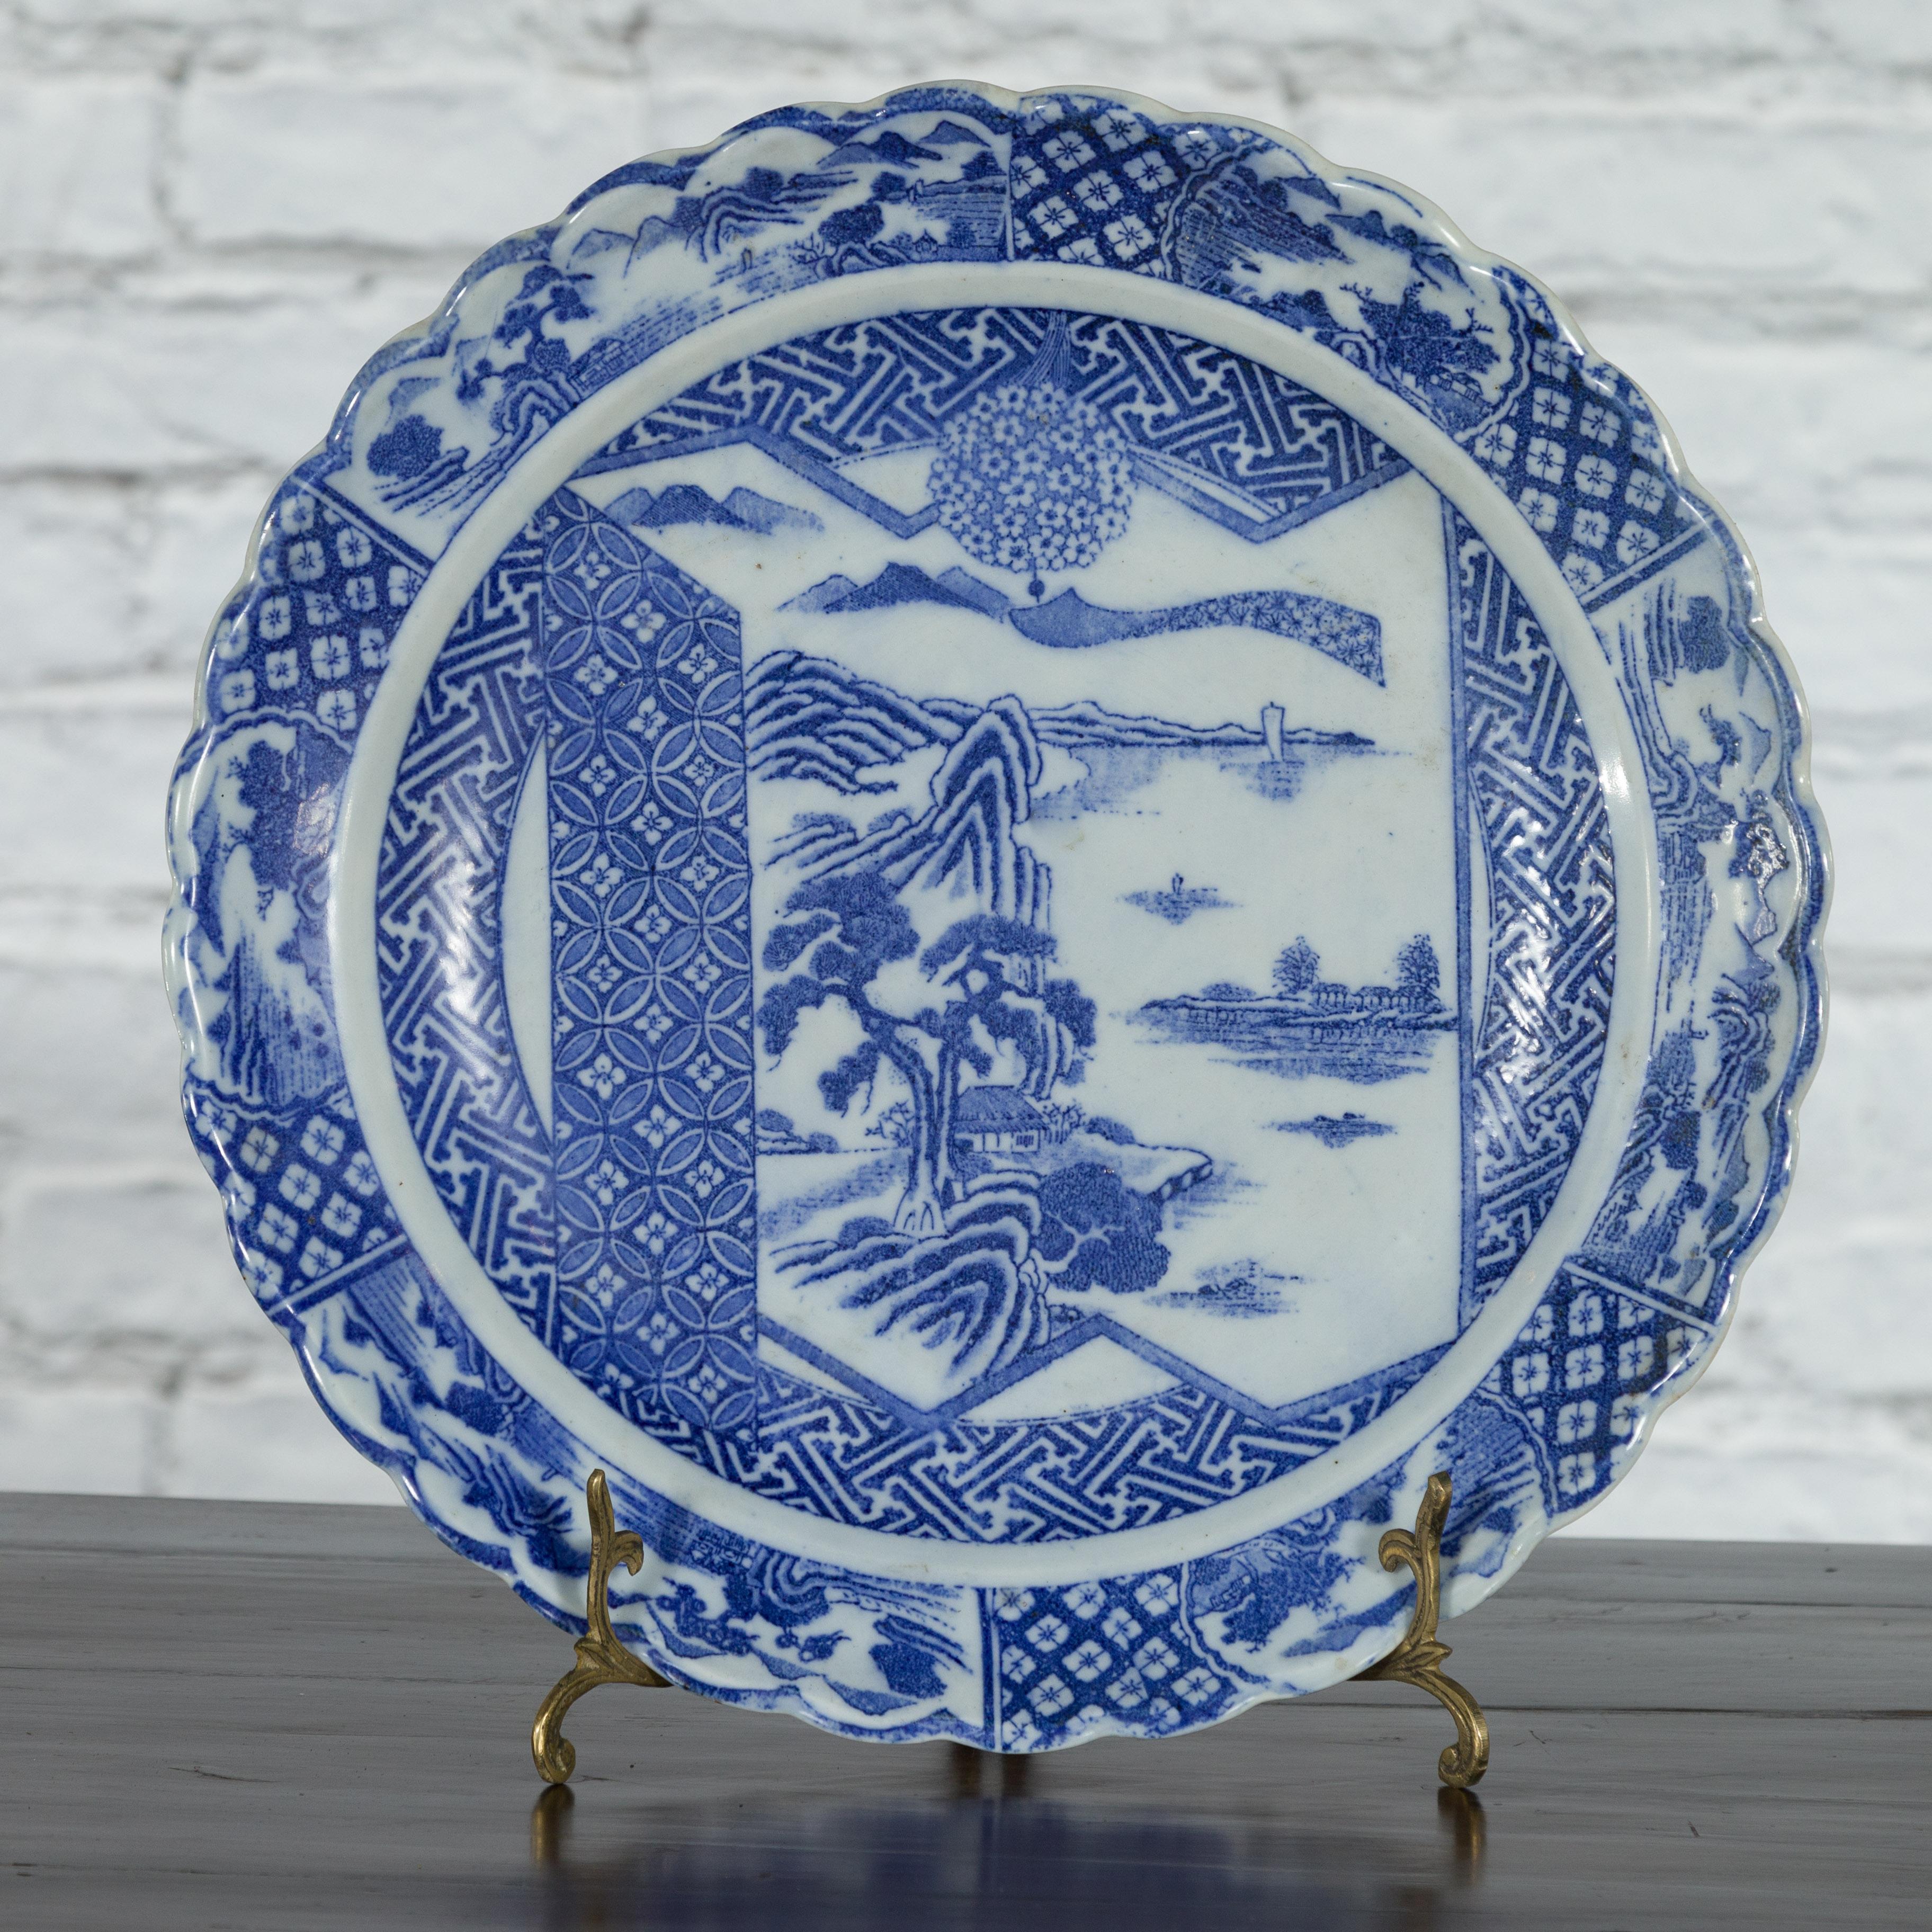 Hand-Painted Japanese 19th Century Blue and White Porcelain Plate with Landscapes and Flowers For Sale